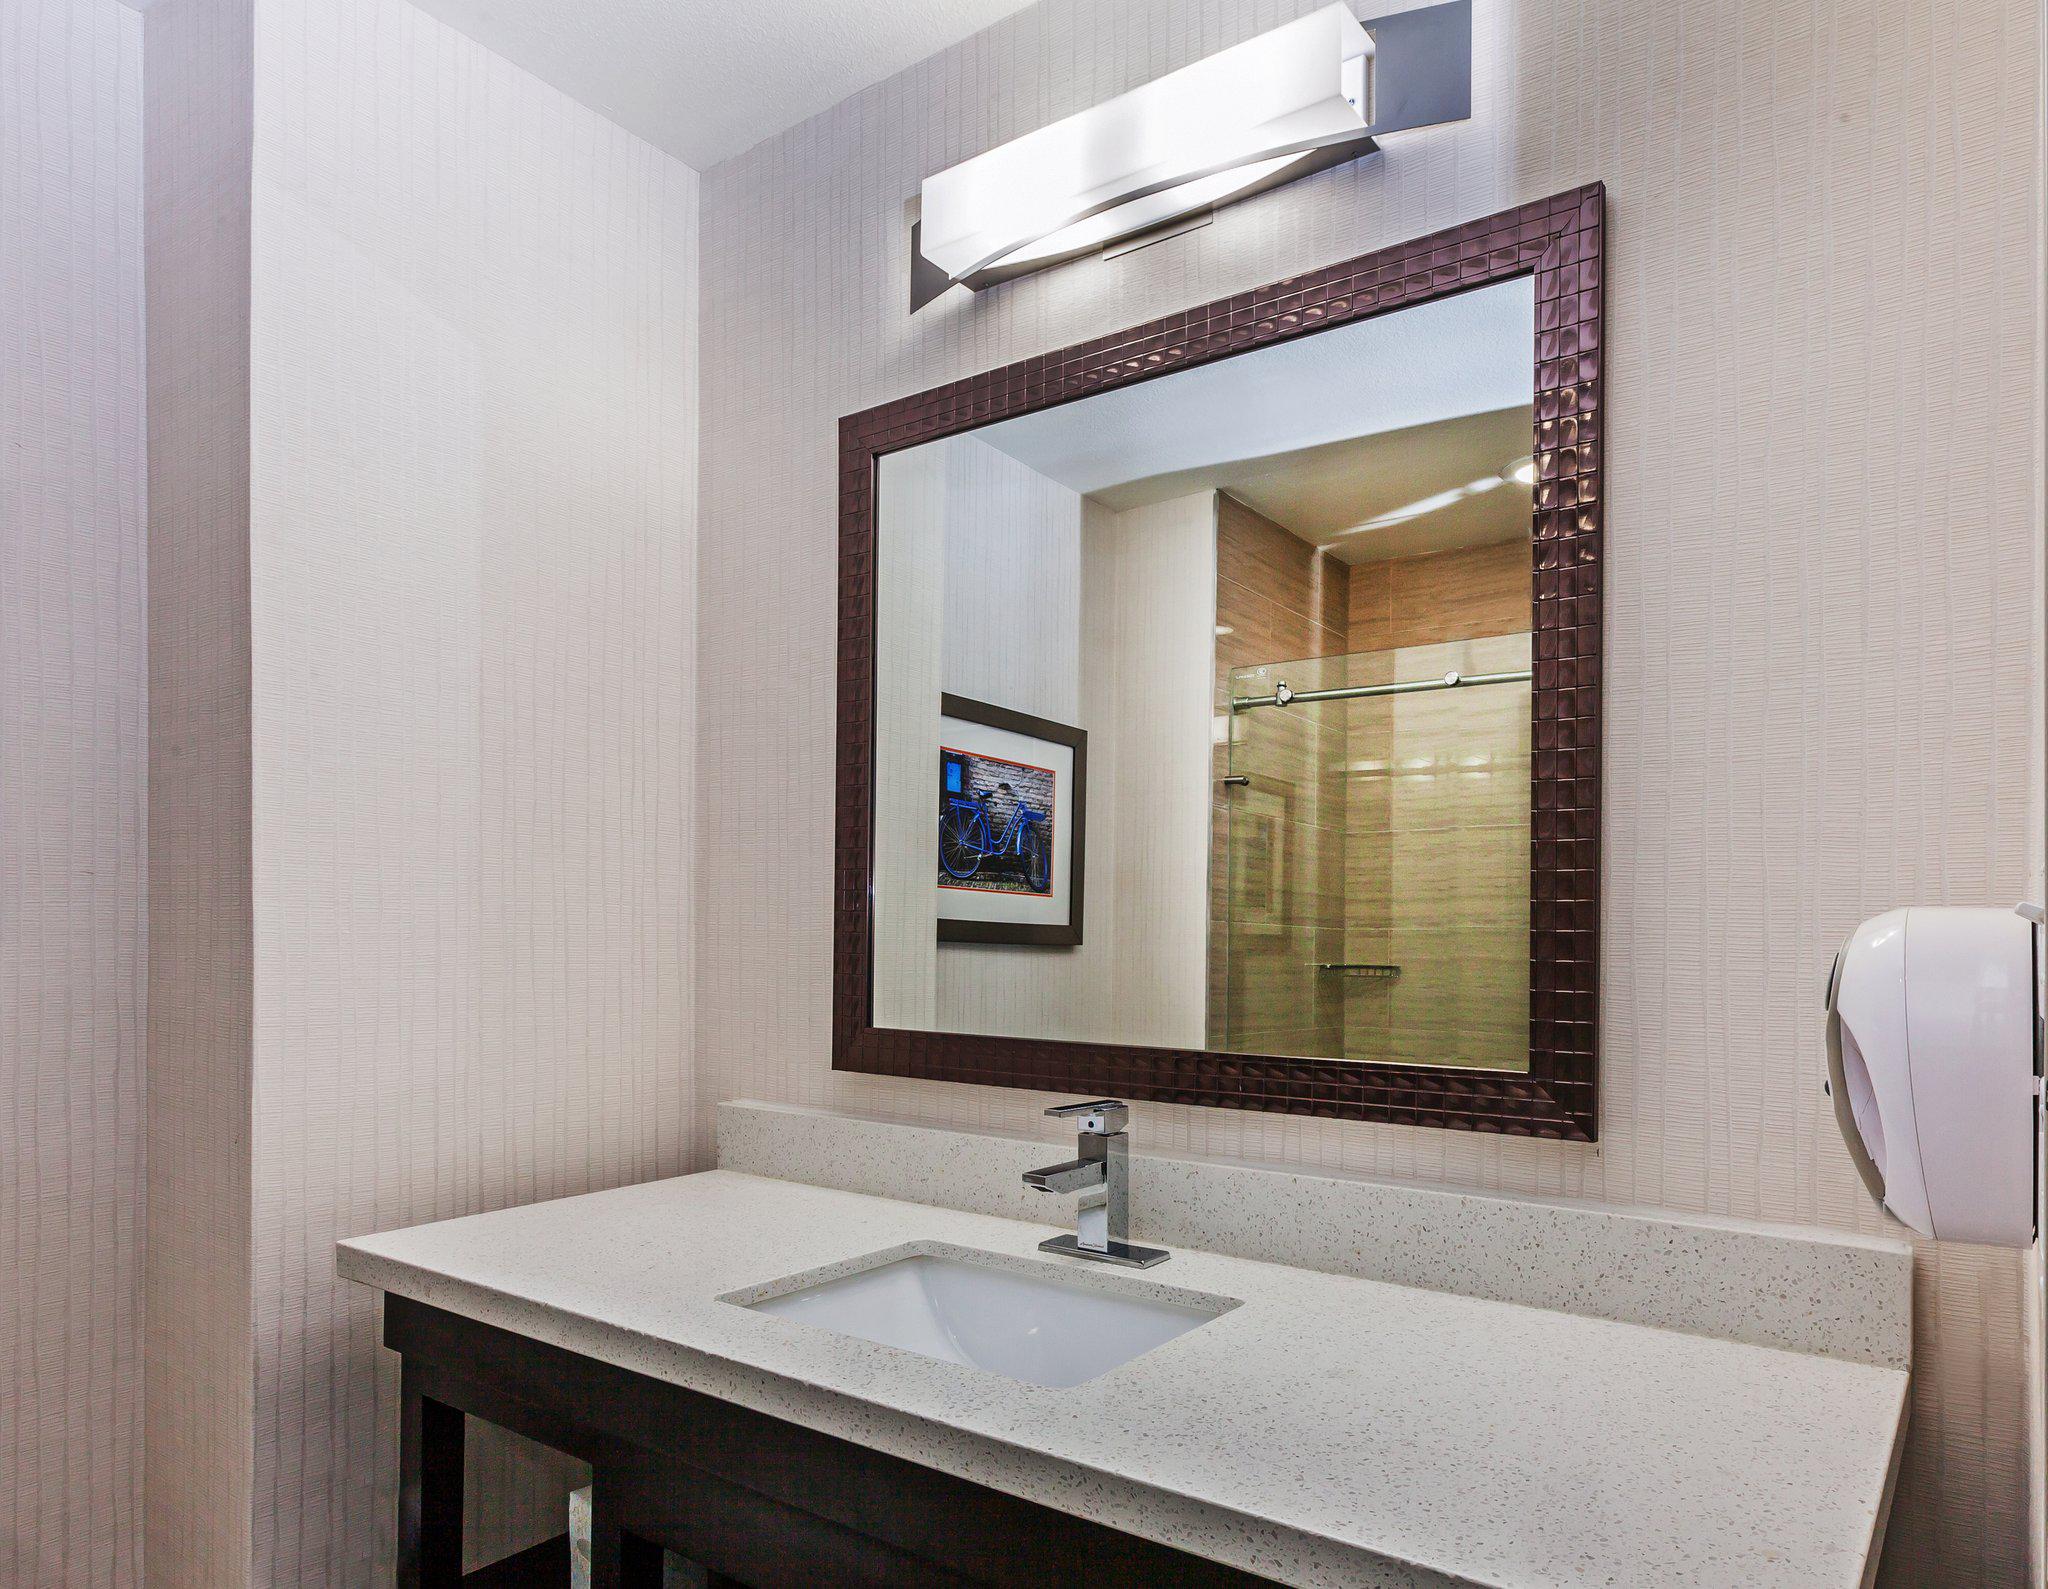 Holiday Inn Express & Suites Houston East Photo